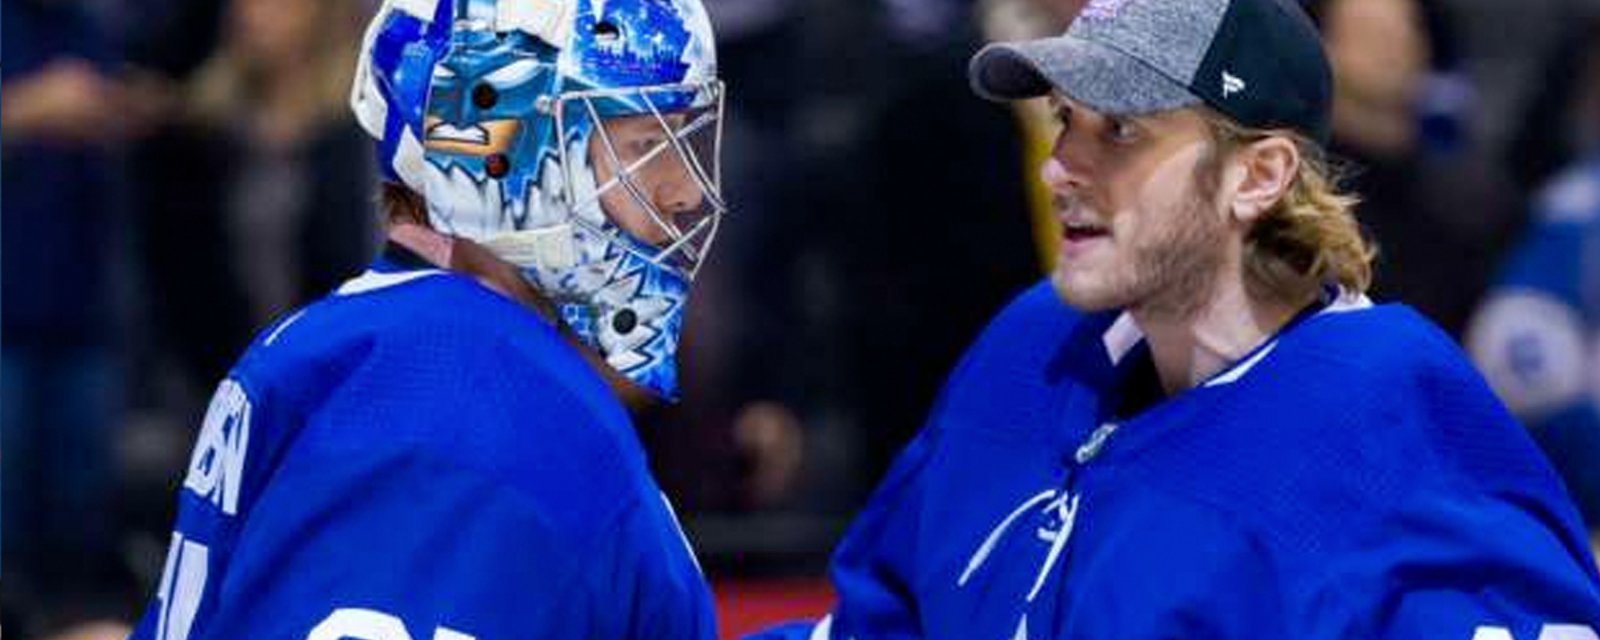 Breaking: More confusion between the pipes moments before Leafs take on Bruins